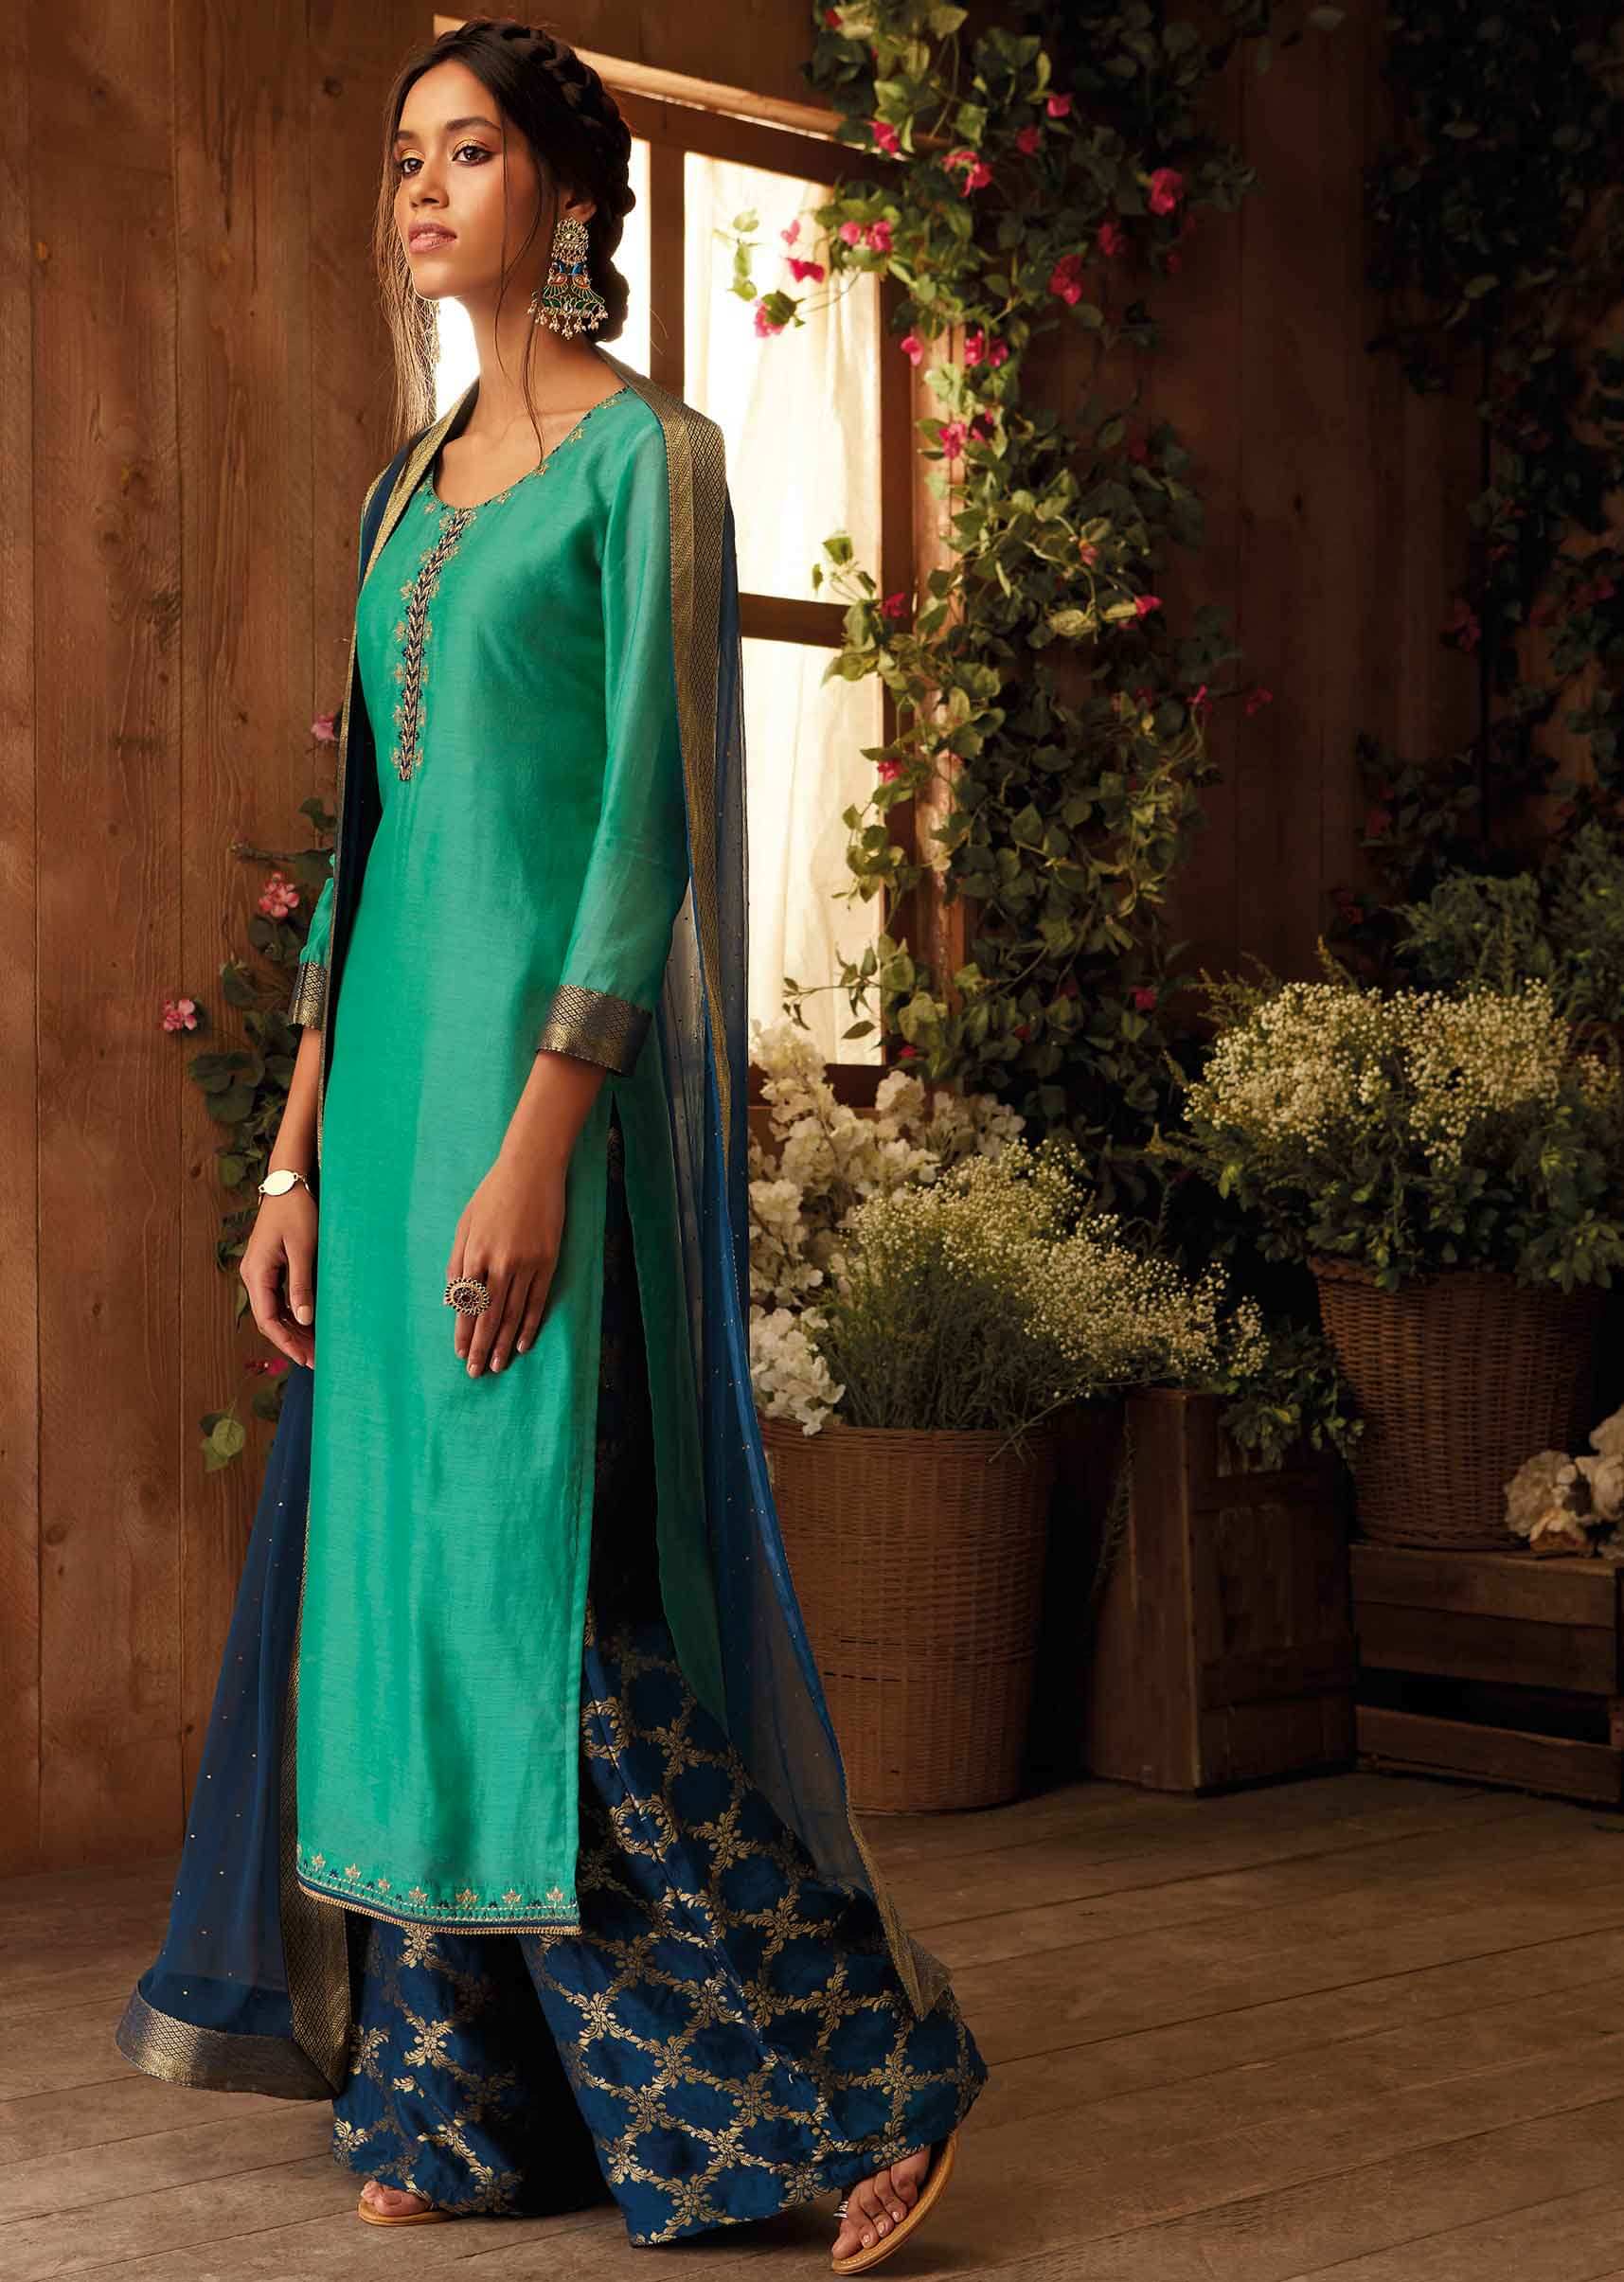 Fern green unstitched suit paired with  floral weaved bottoms and chiffon dupatta with brocade border